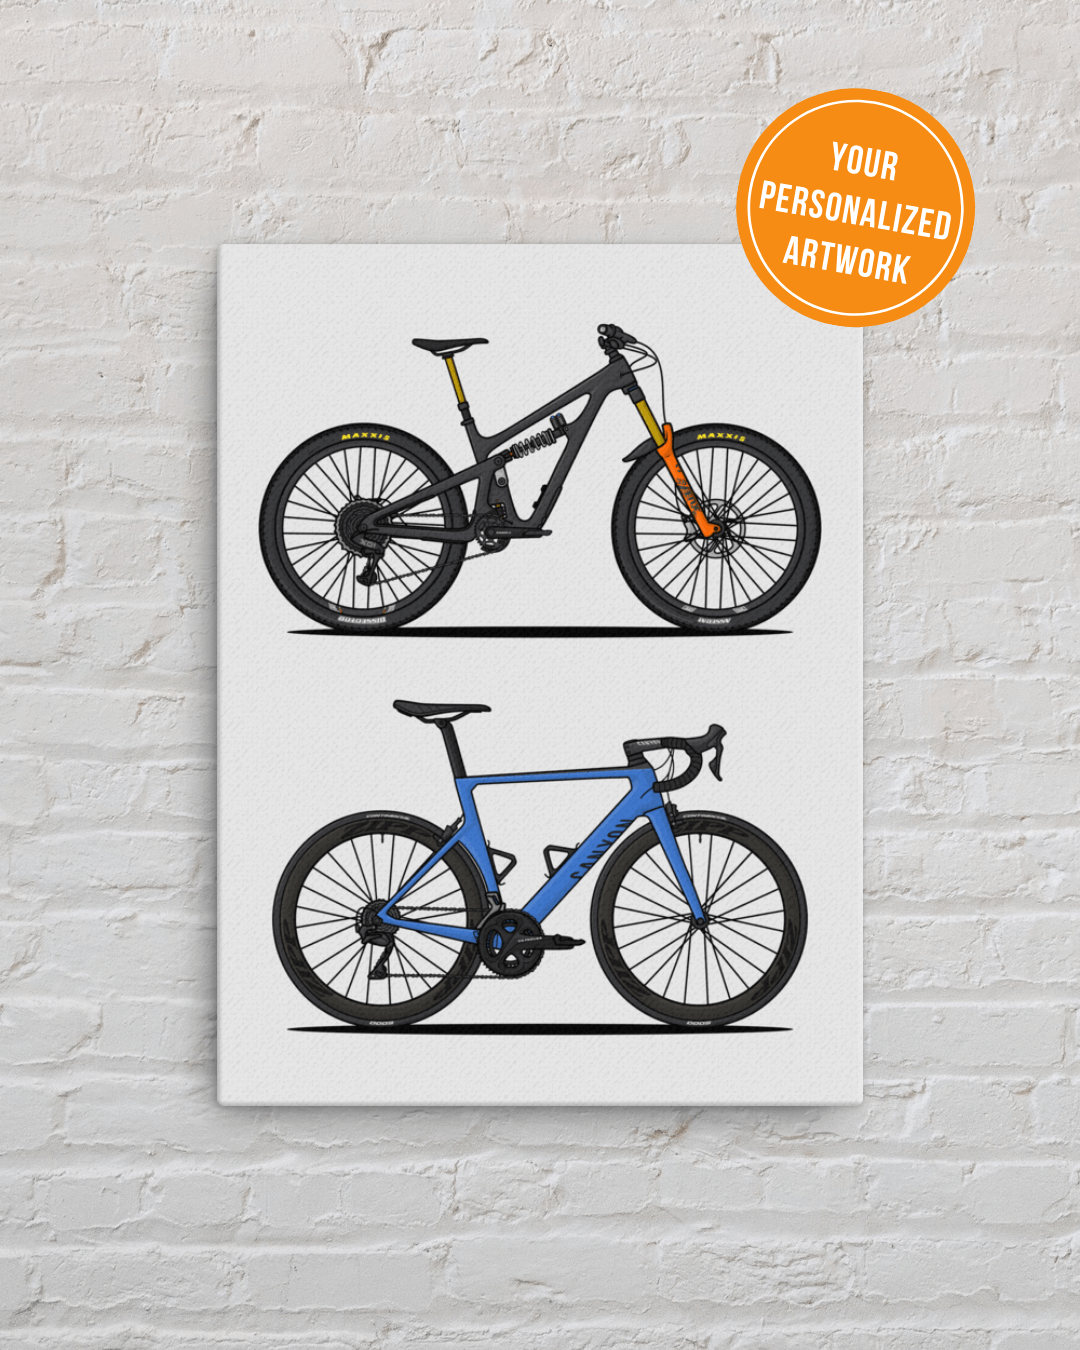 Personalized Bicycle Print 2 bikes by Stand Out Bikes 